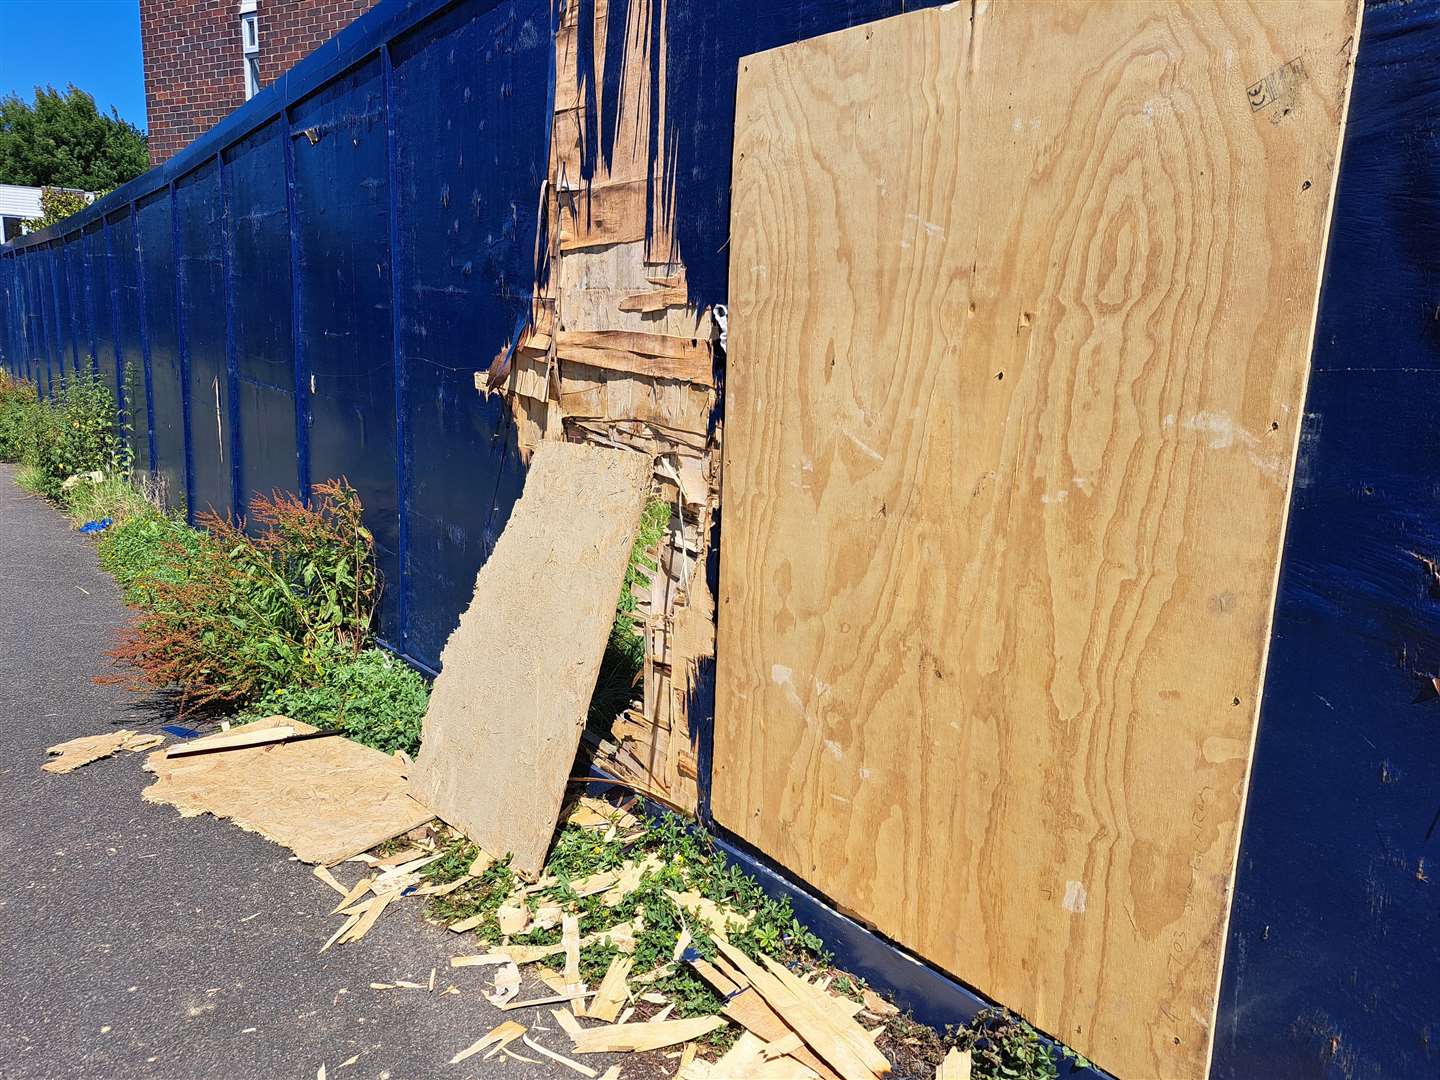 Vandals targeted the Oakleigh House site last summer